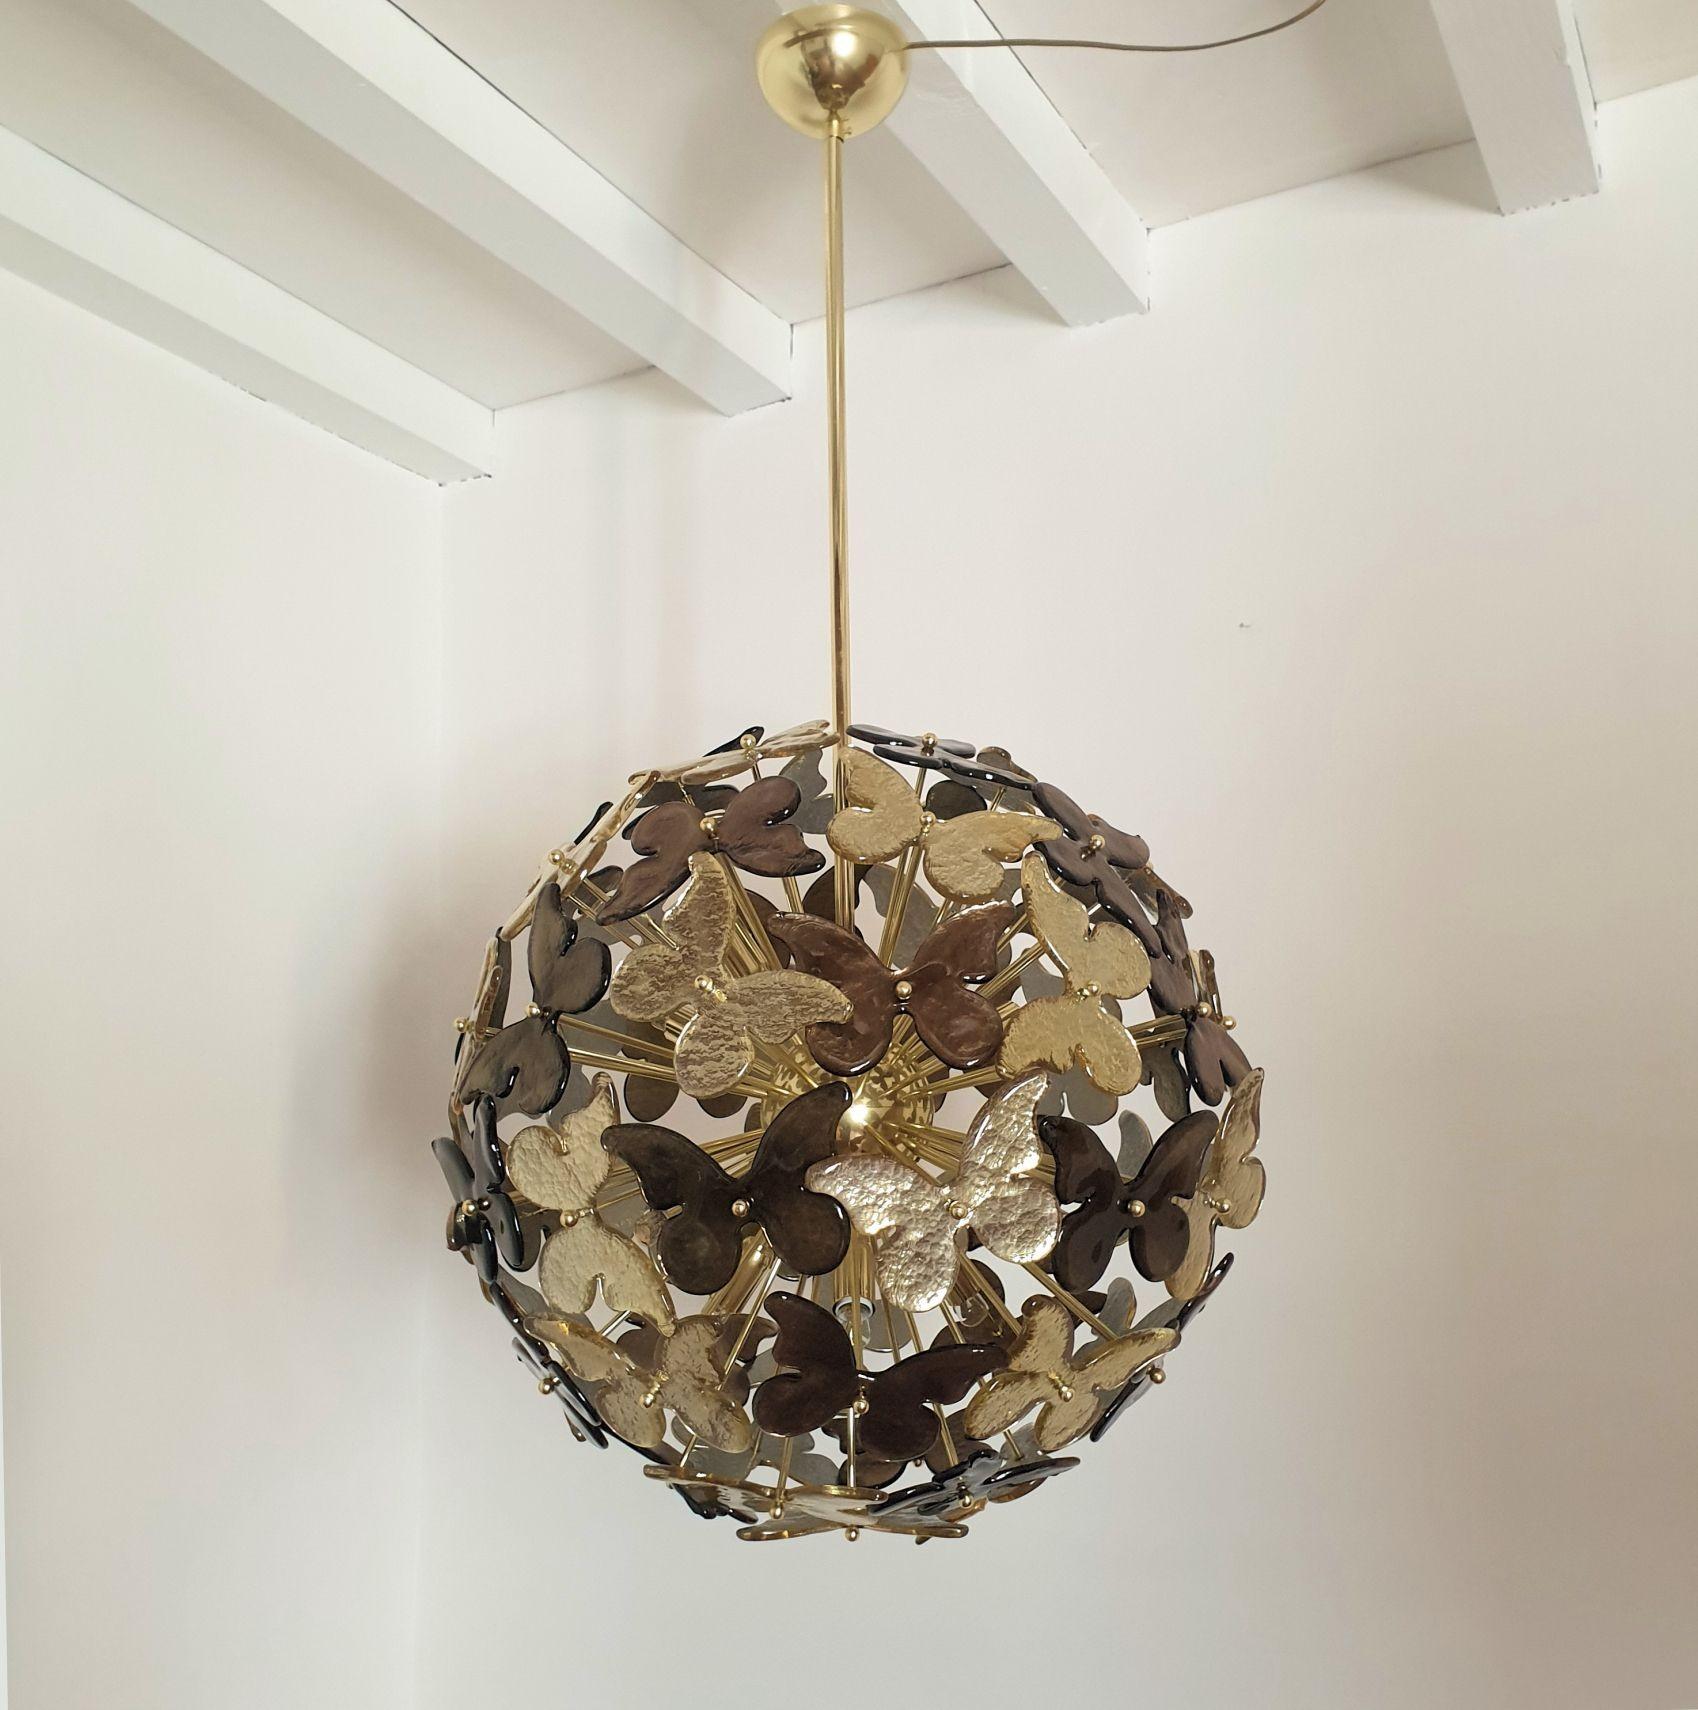 Large Murano glass sputnik chandelier attributed to Mazzega 1980s, Italy.
The Italian Murano glass chandelier has a polished brass frame, with 12 lights and is professionally rewired for the US with Candelabra base sockets or E12.
The Murano glasses